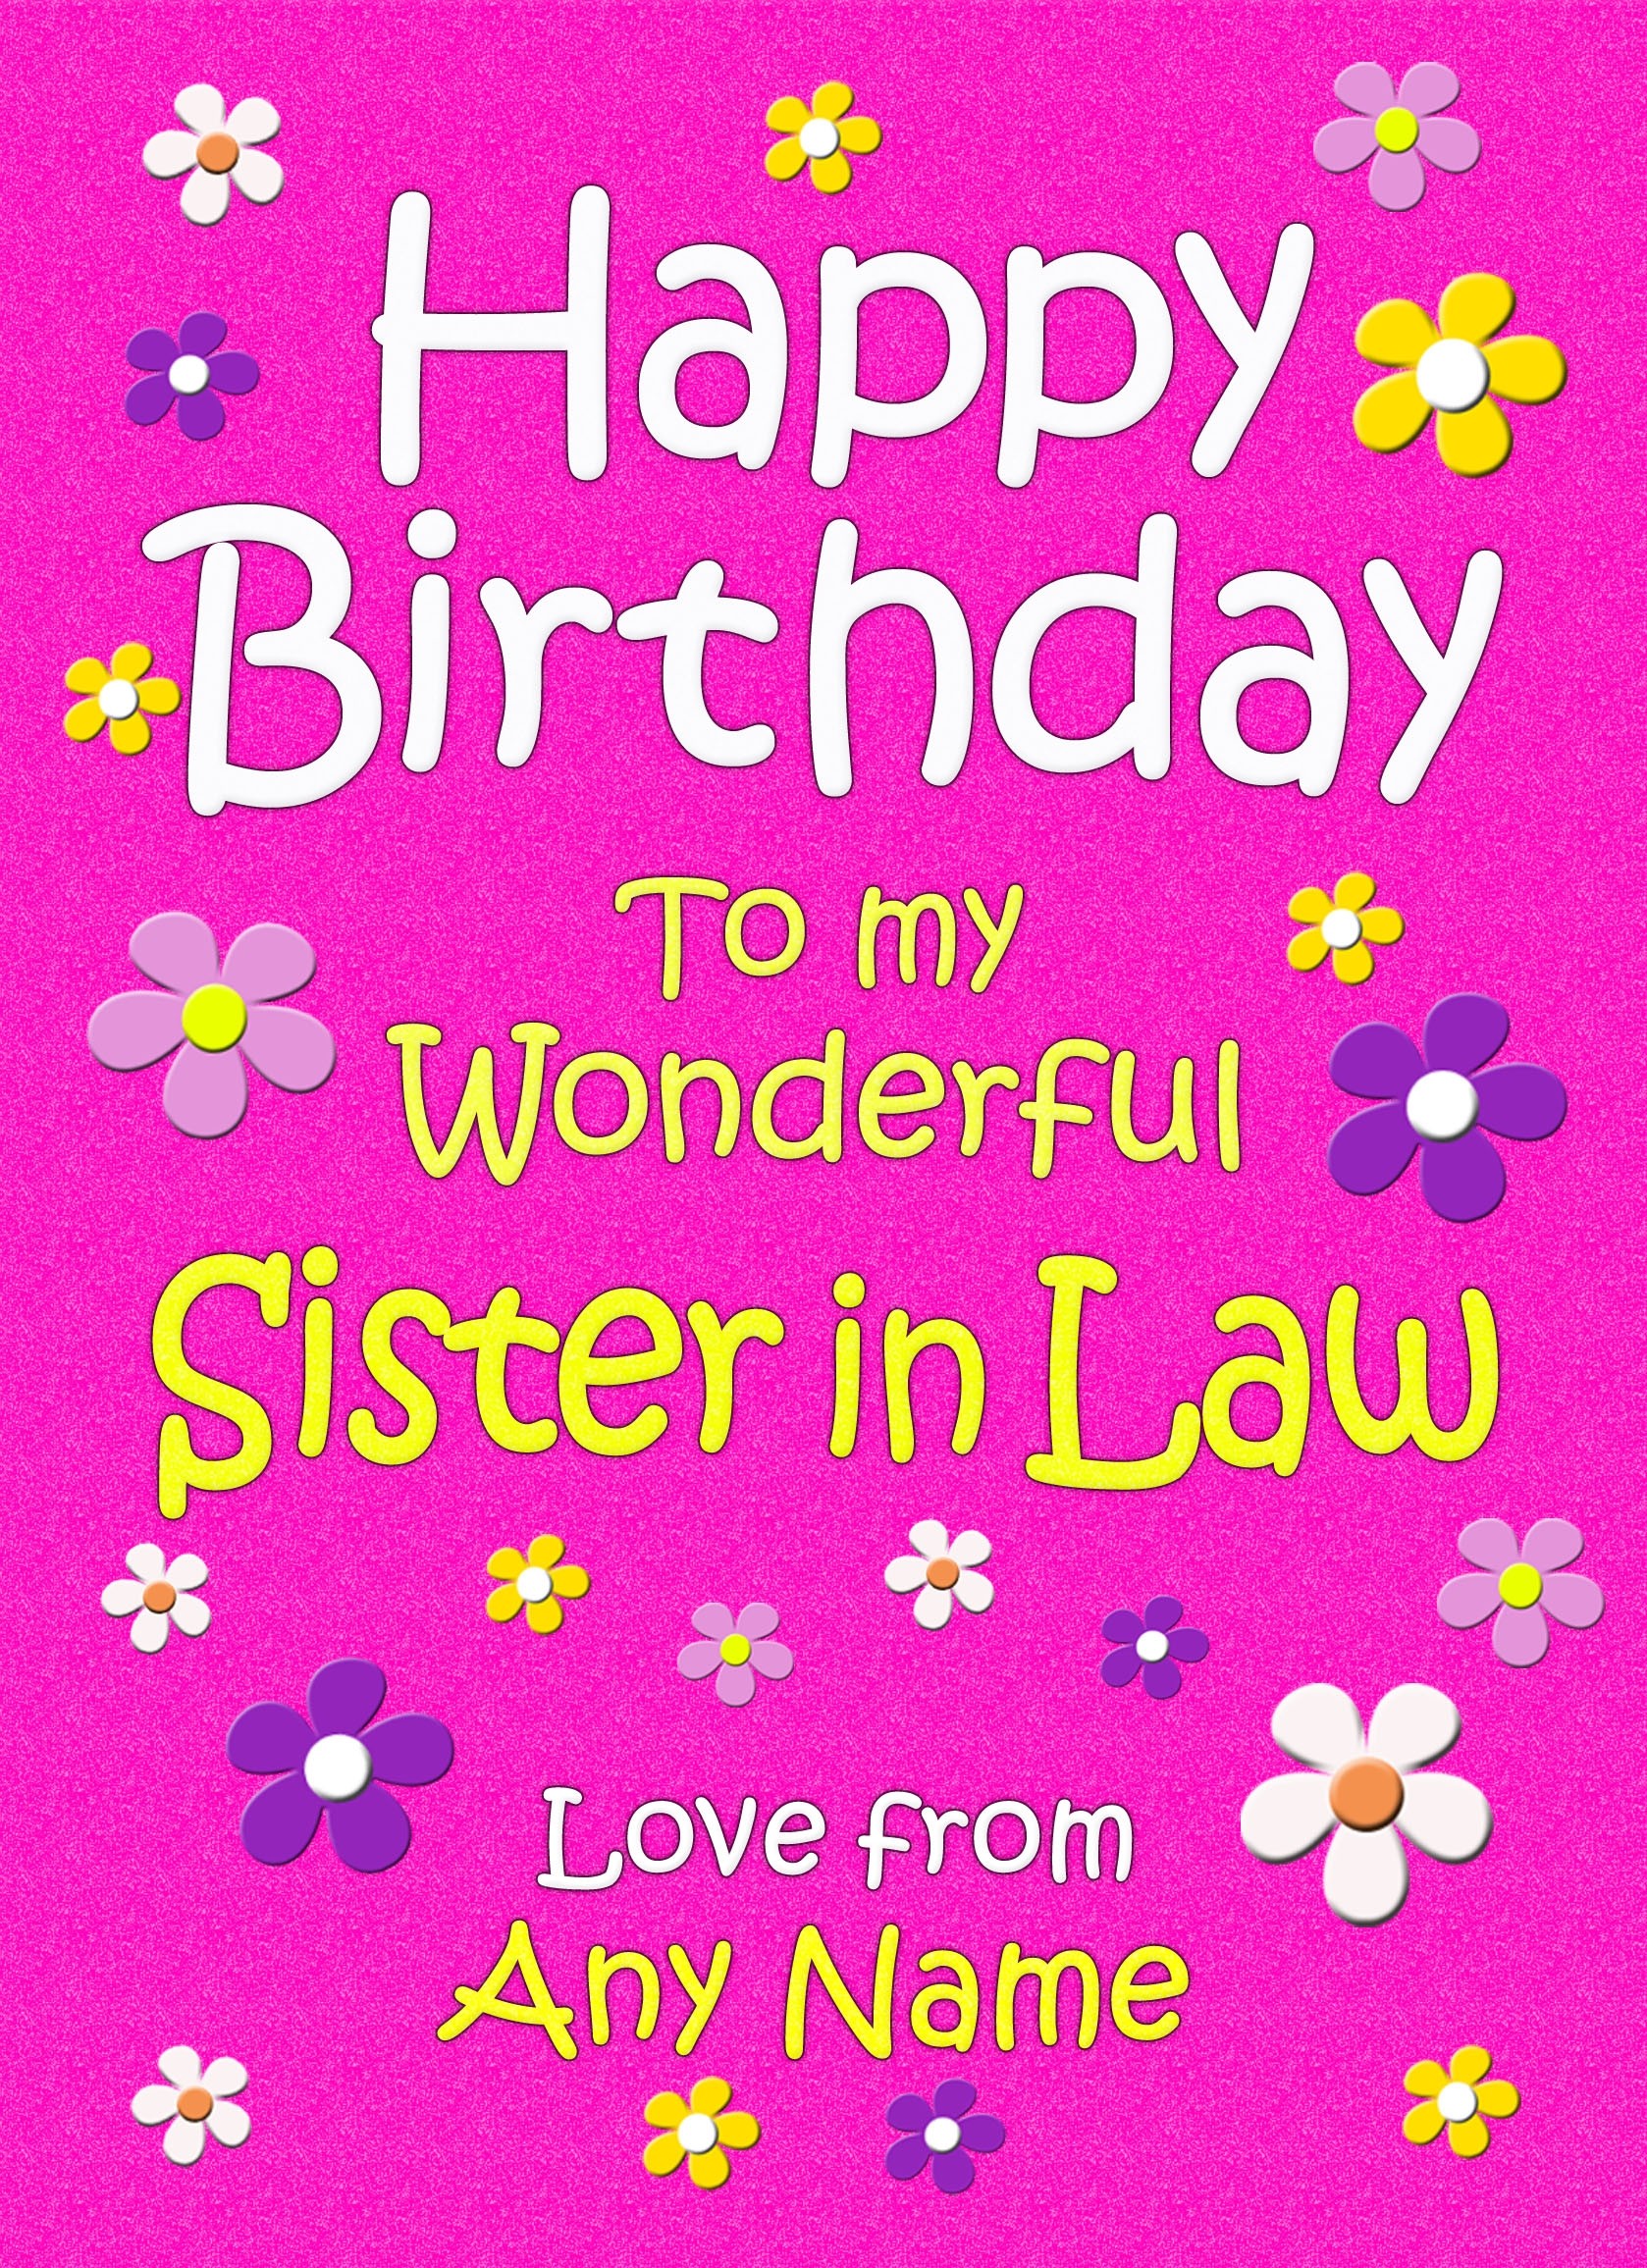 Personalised Sister in Law Birthday Card (Cerise)